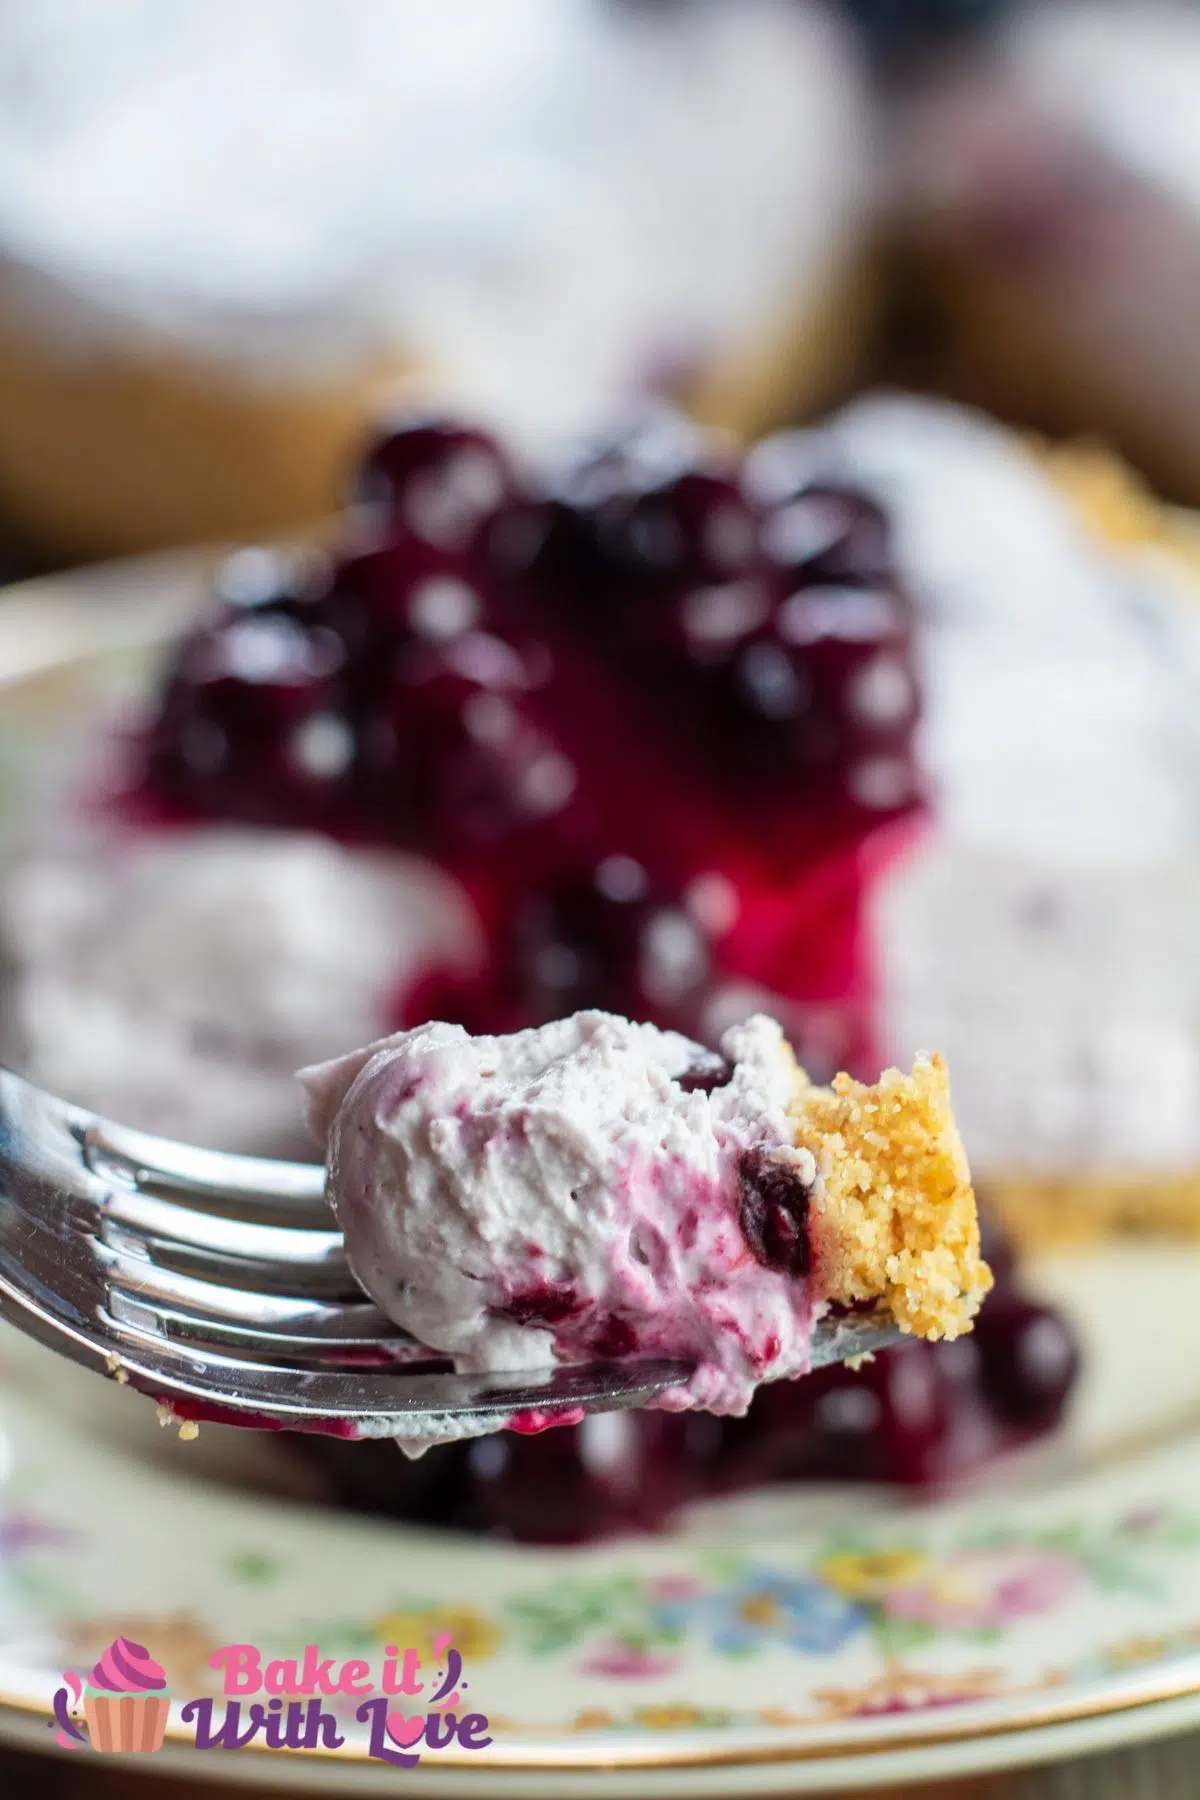 Tall image of the no-bake blueberry cheesecake readied on a form for a bite.